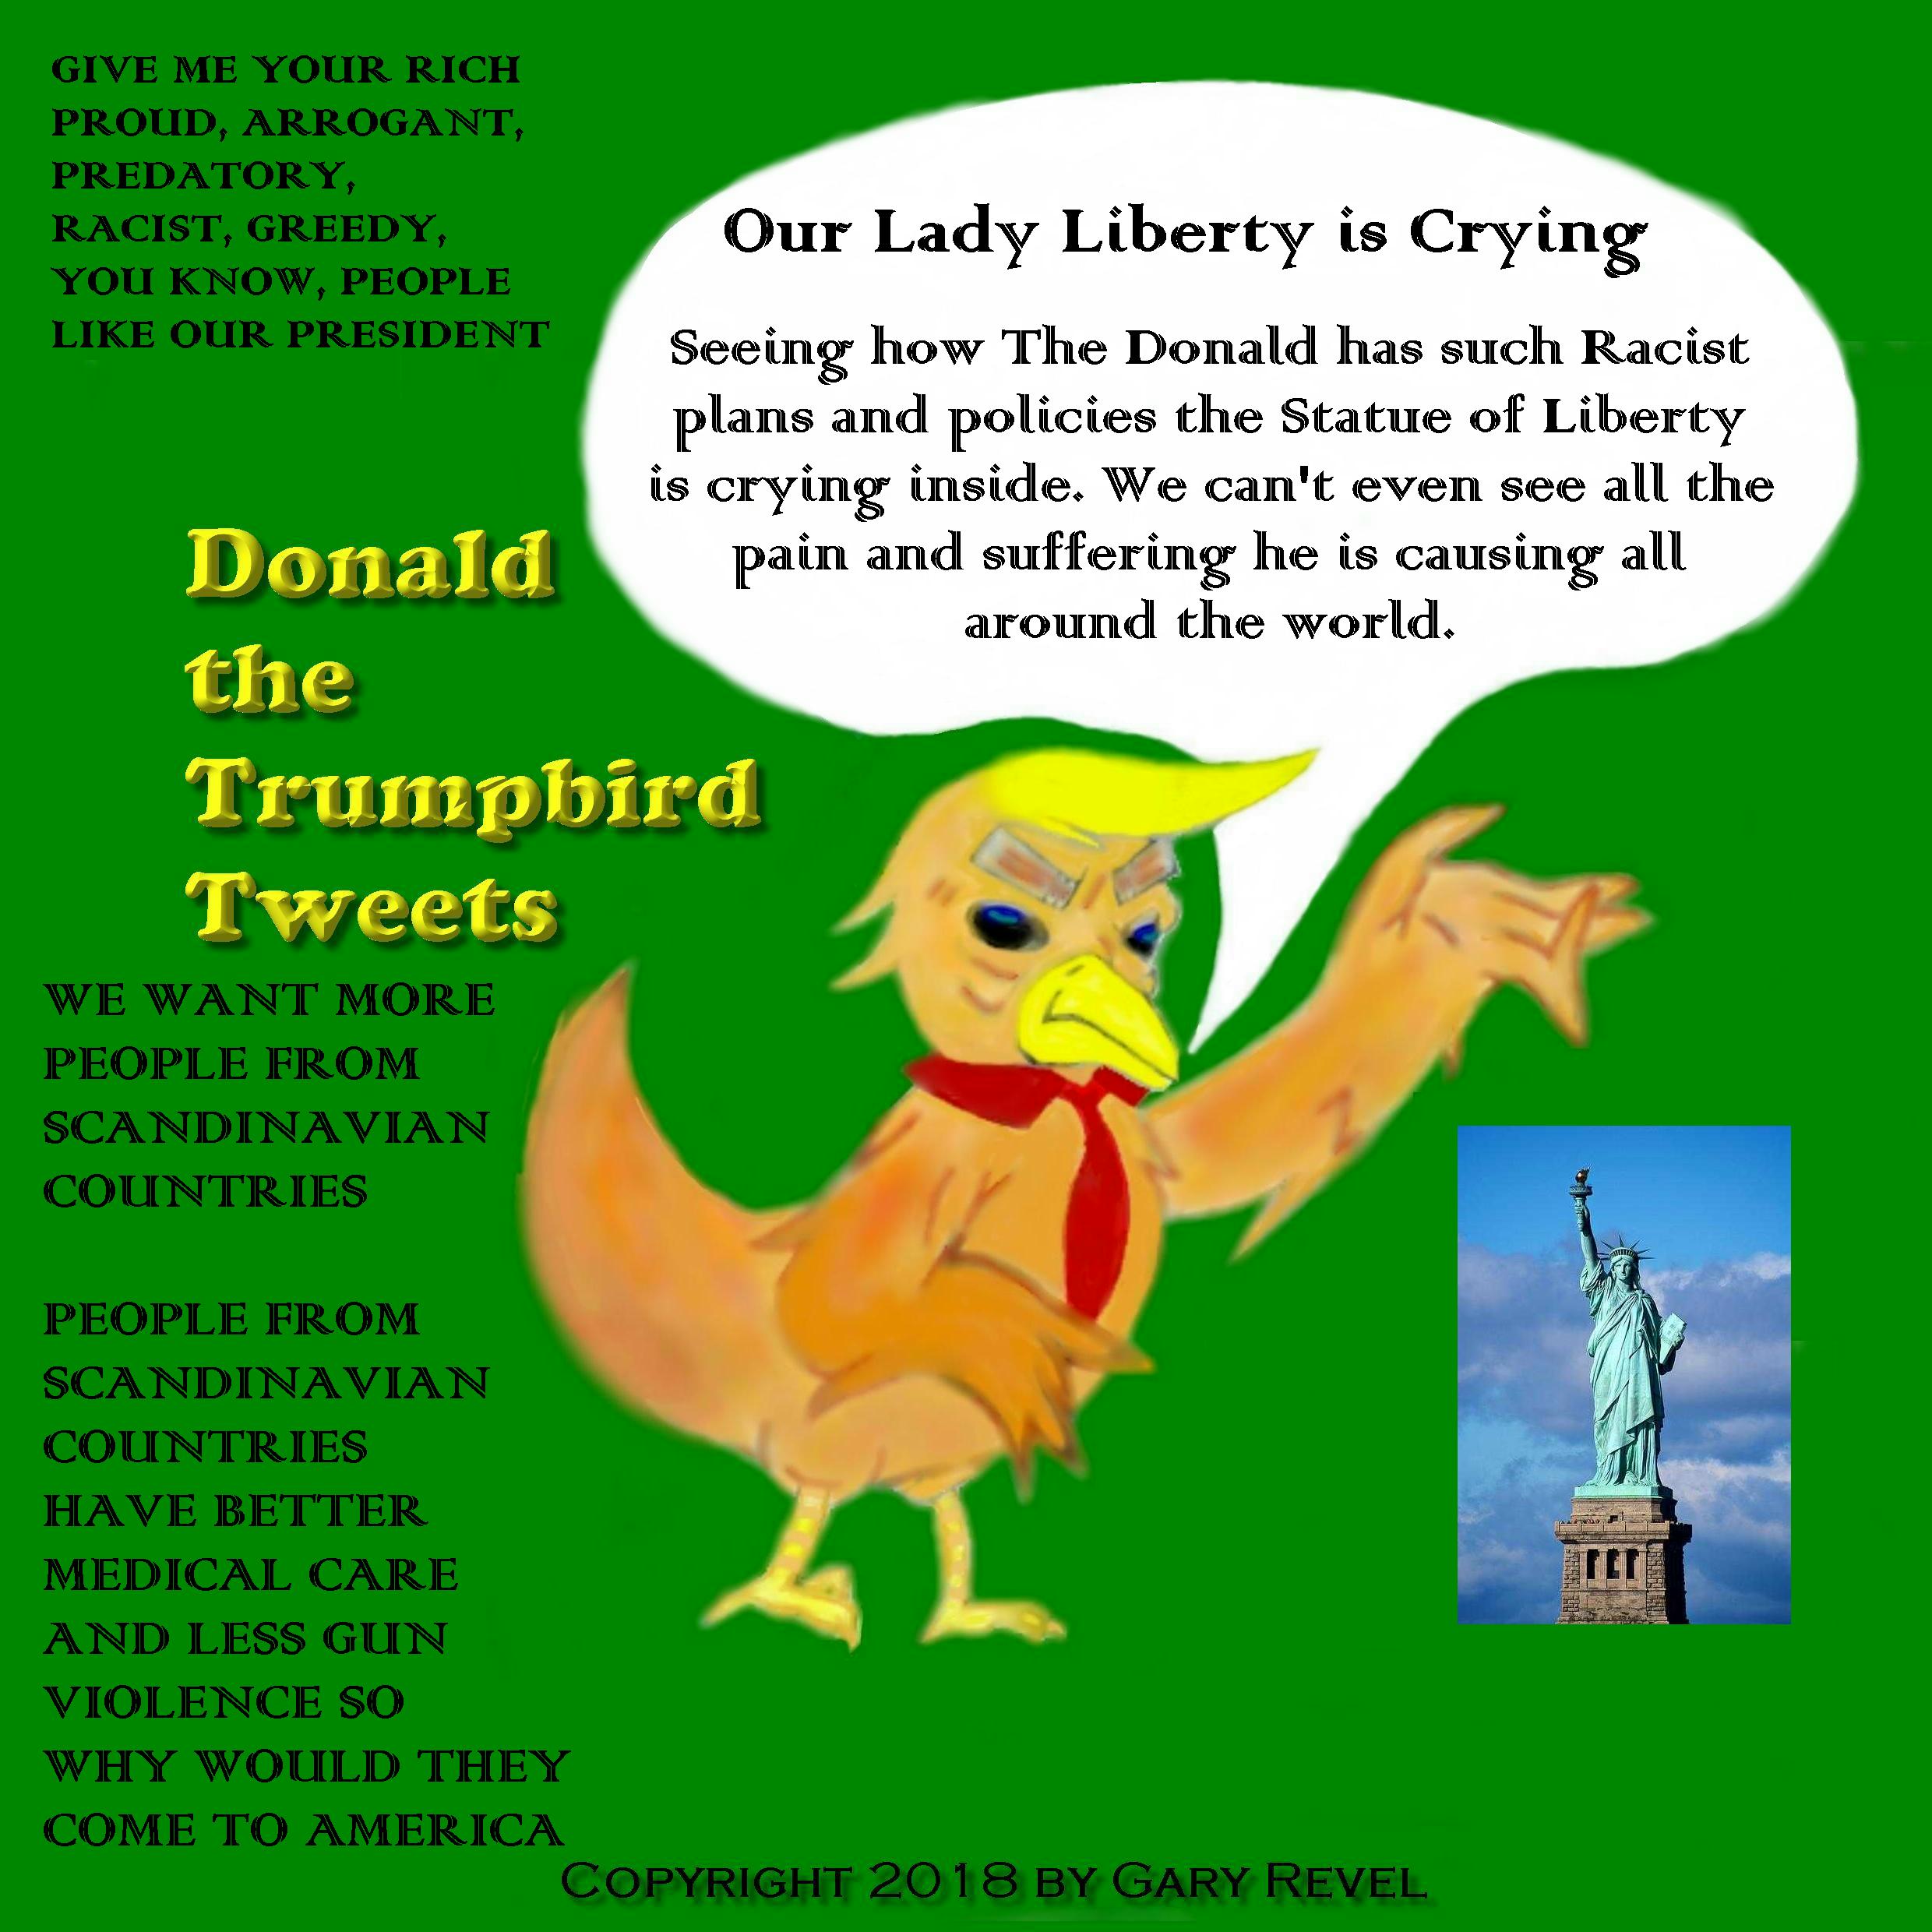 Donald the Trumpbird tweets Lady Liberty is Crying